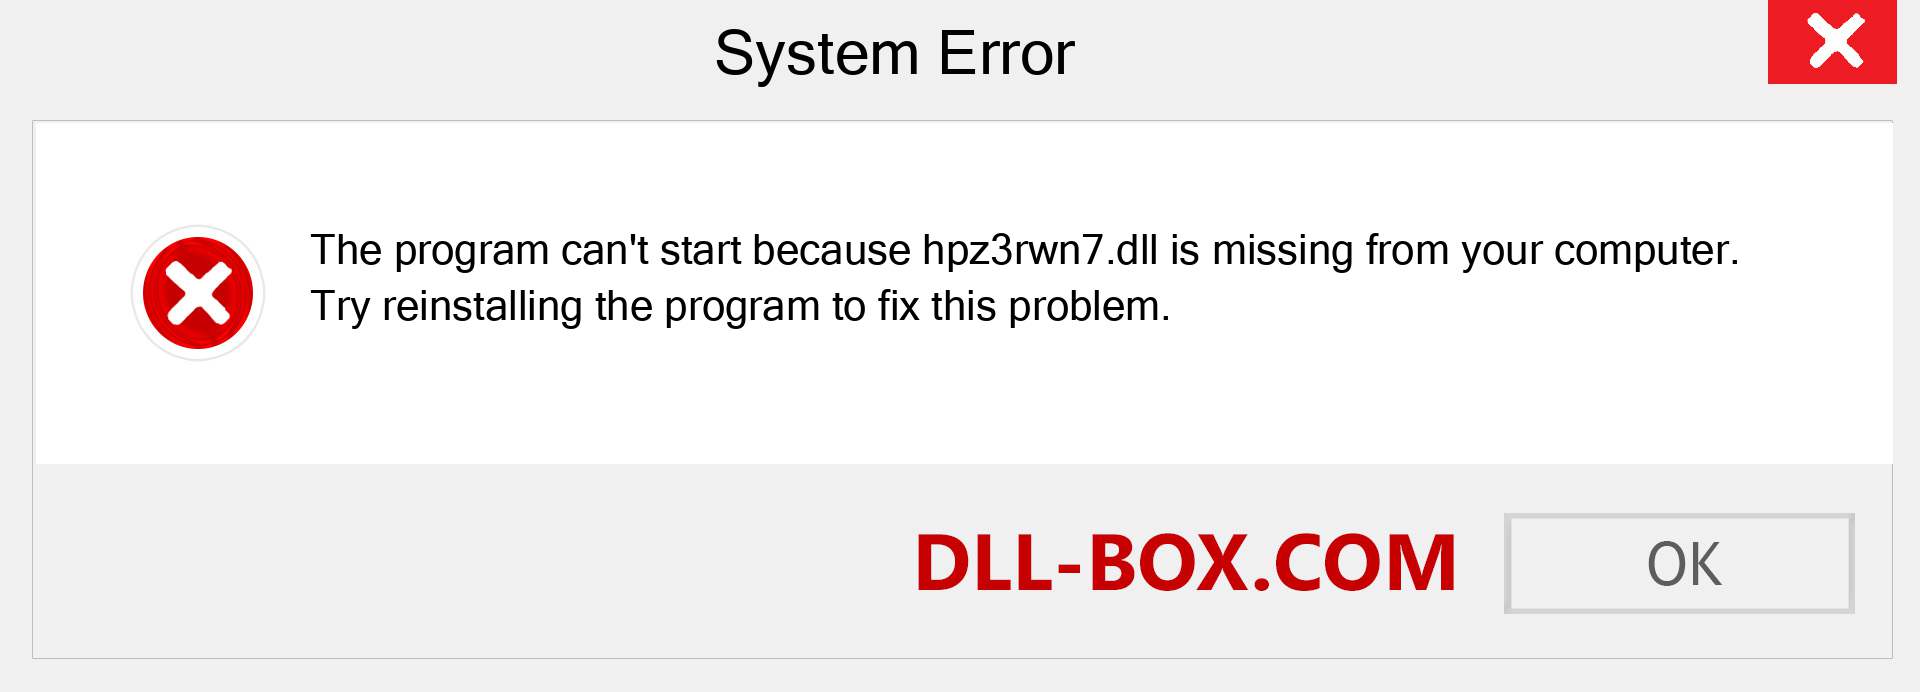  hpz3rwn7.dll file is missing?. Download for Windows 7, 8, 10 - Fix  hpz3rwn7 dll Missing Error on Windows, photos, images